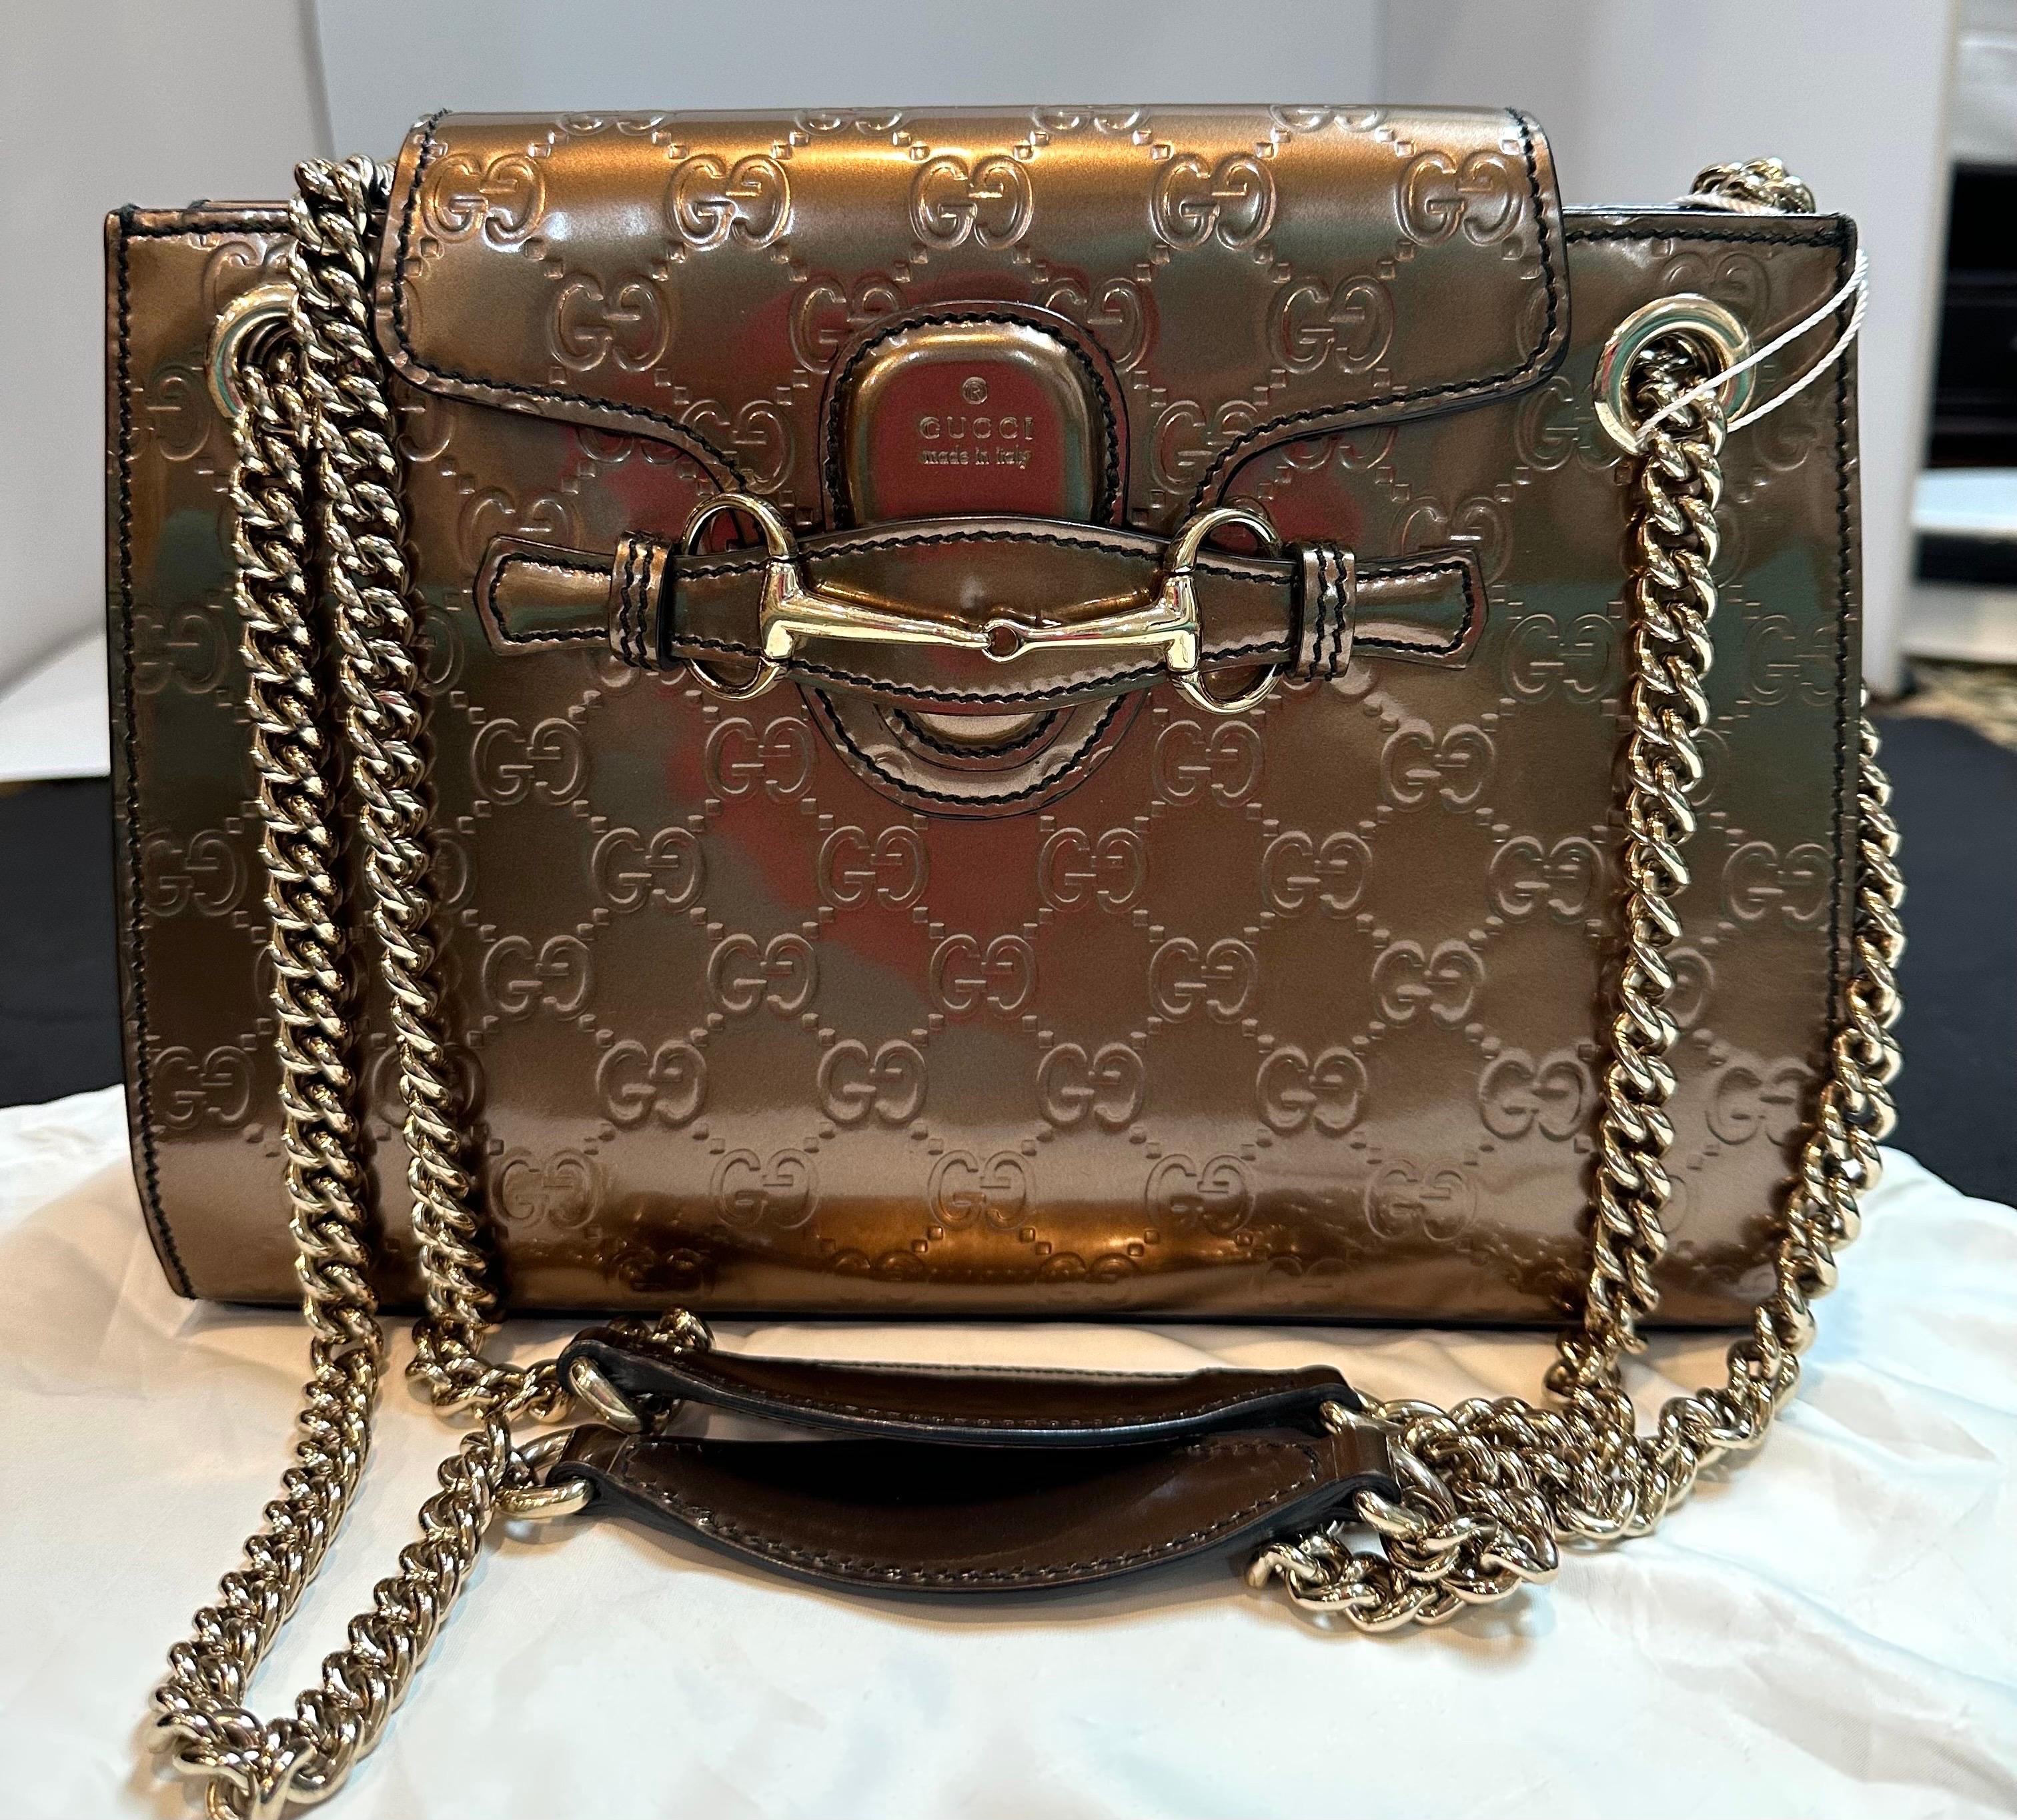 
Bag is in Super excellent condition , just like brand  new 
Bag is brand new , only tassels are missing
Gucci Shoulder Bag
Bronze & Metallic Patent Leather
GG Signature
Gold-Tone Hardware
Double Chain-Link Shoulder Strap

Gucci Emily  GG Bronze